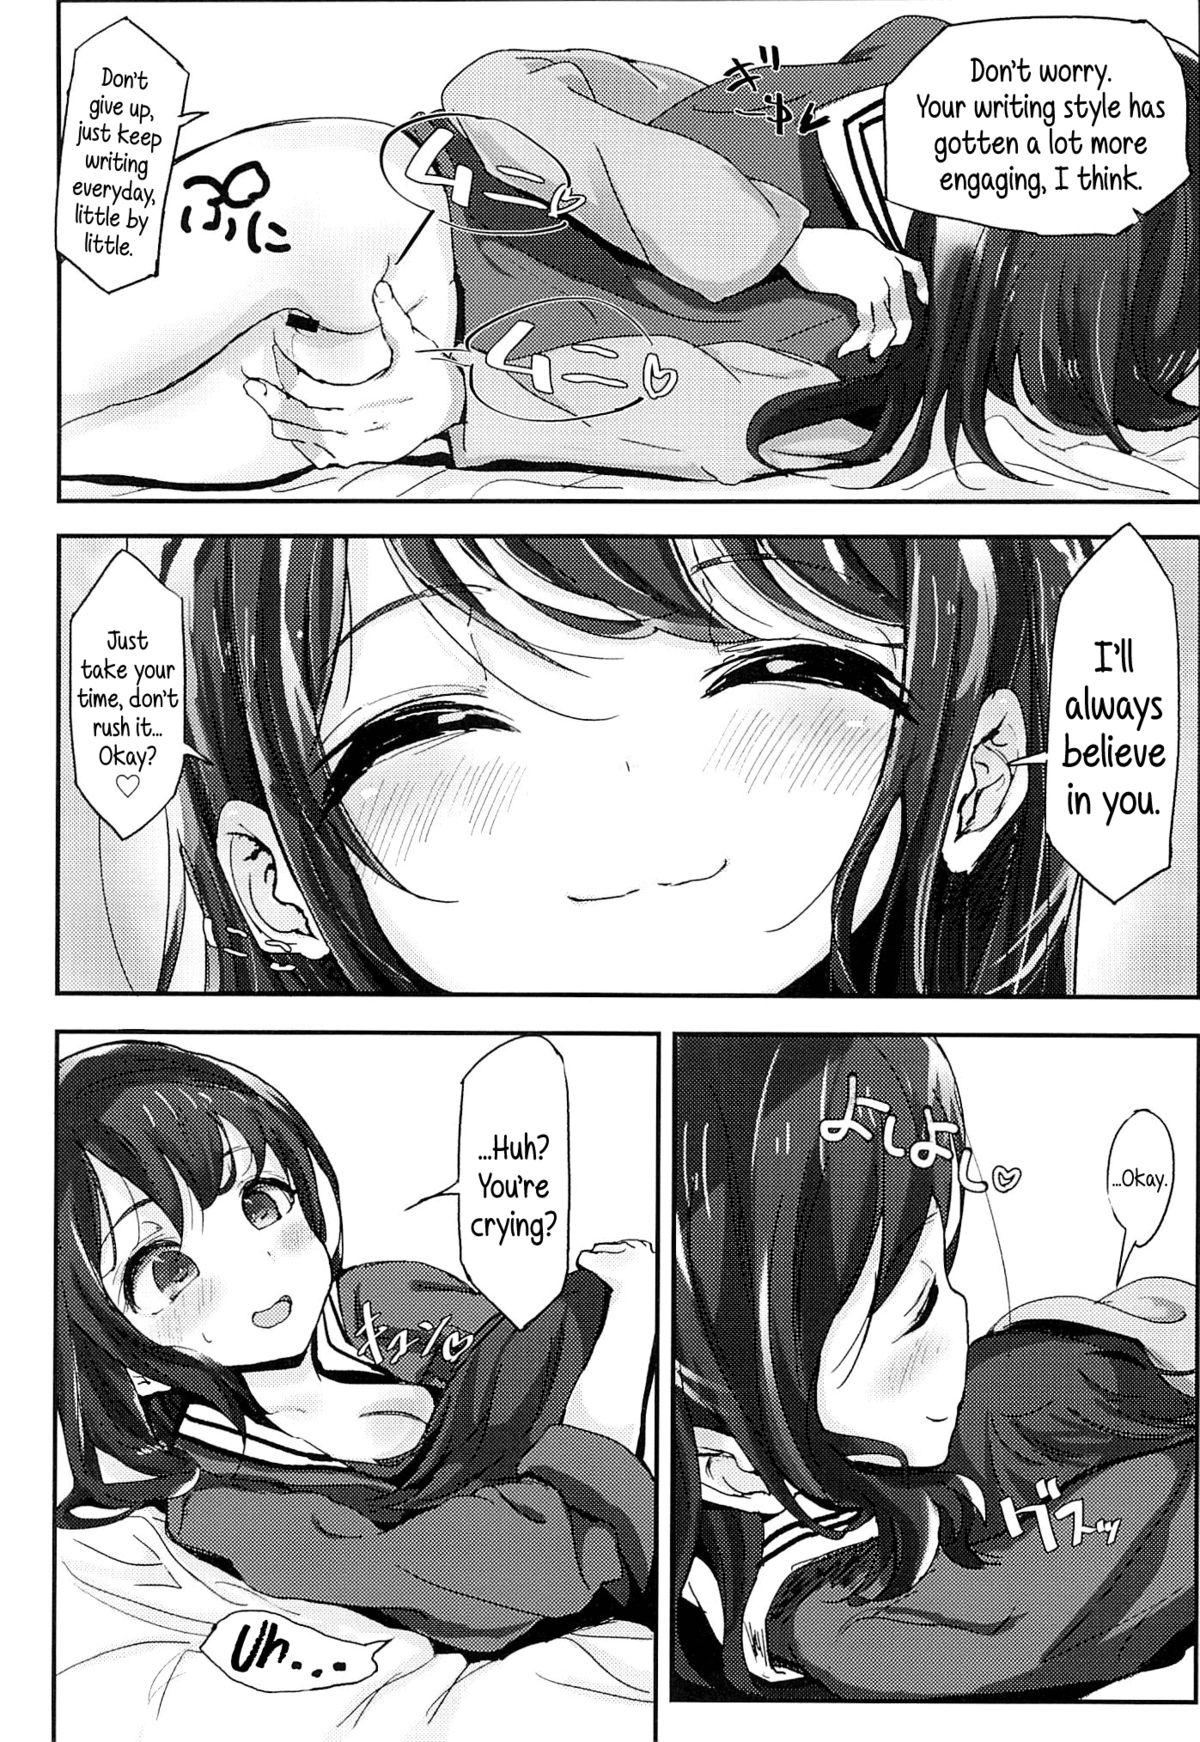 Mujer Shikyuukou no Kanata, Onii chan no Hate | Beyond the mouth of the uterus lies Onii-chan’s demise Teenage Sex - Page 11